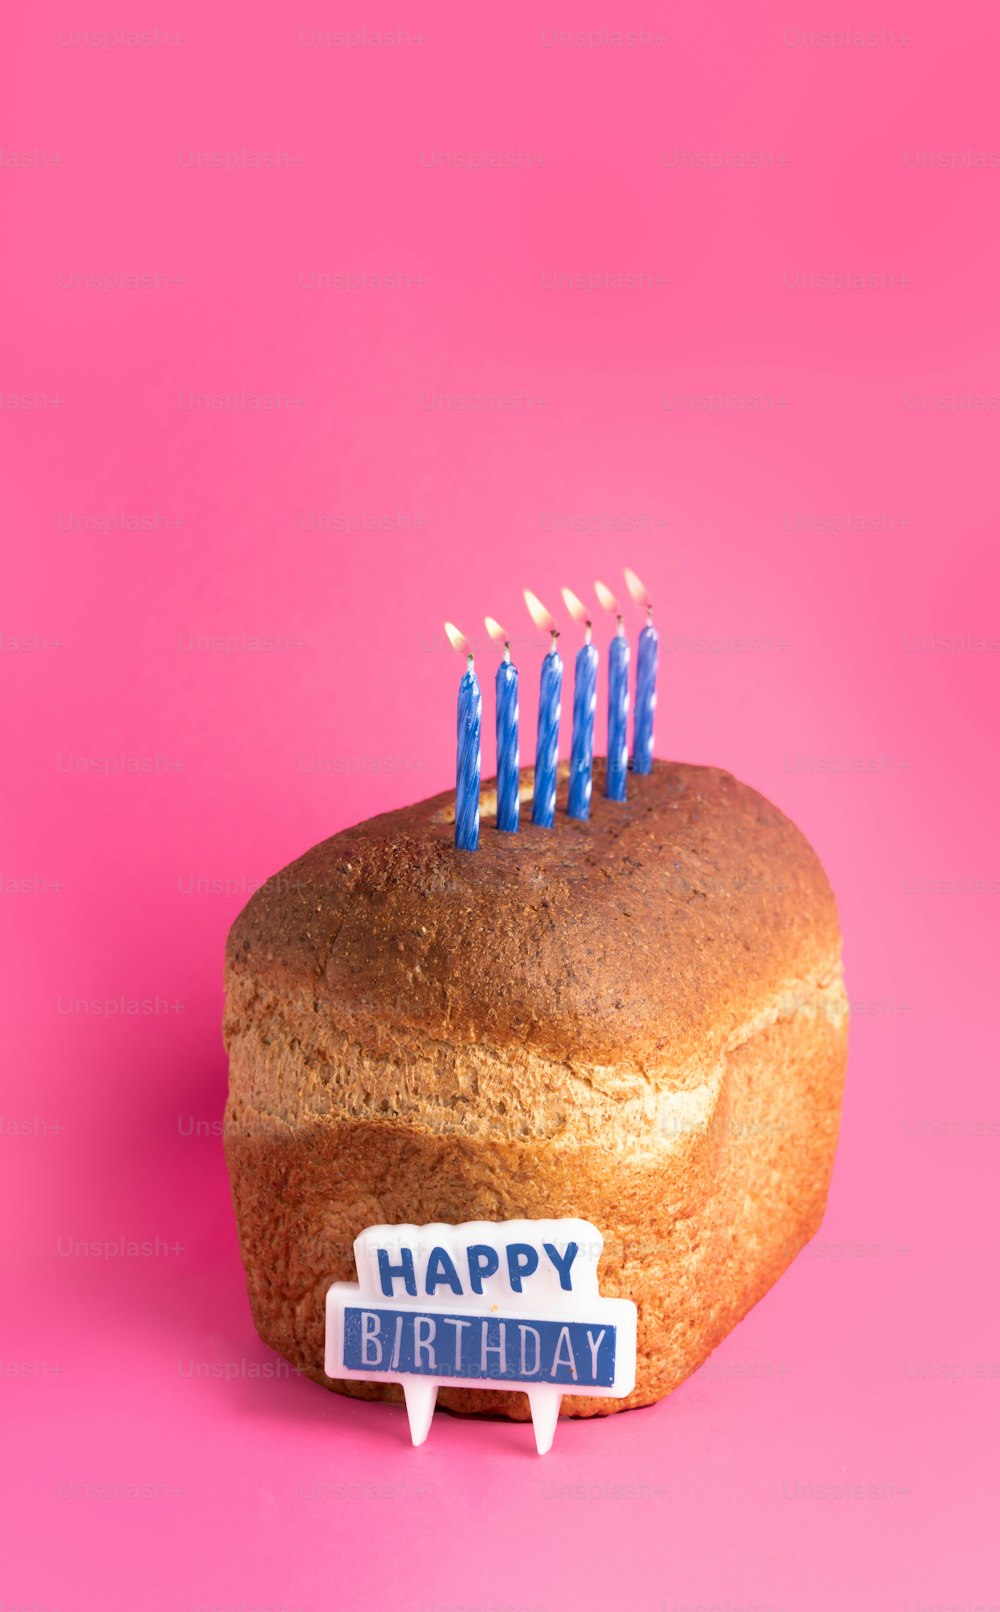 a birthday cake with blue candles on a pink background